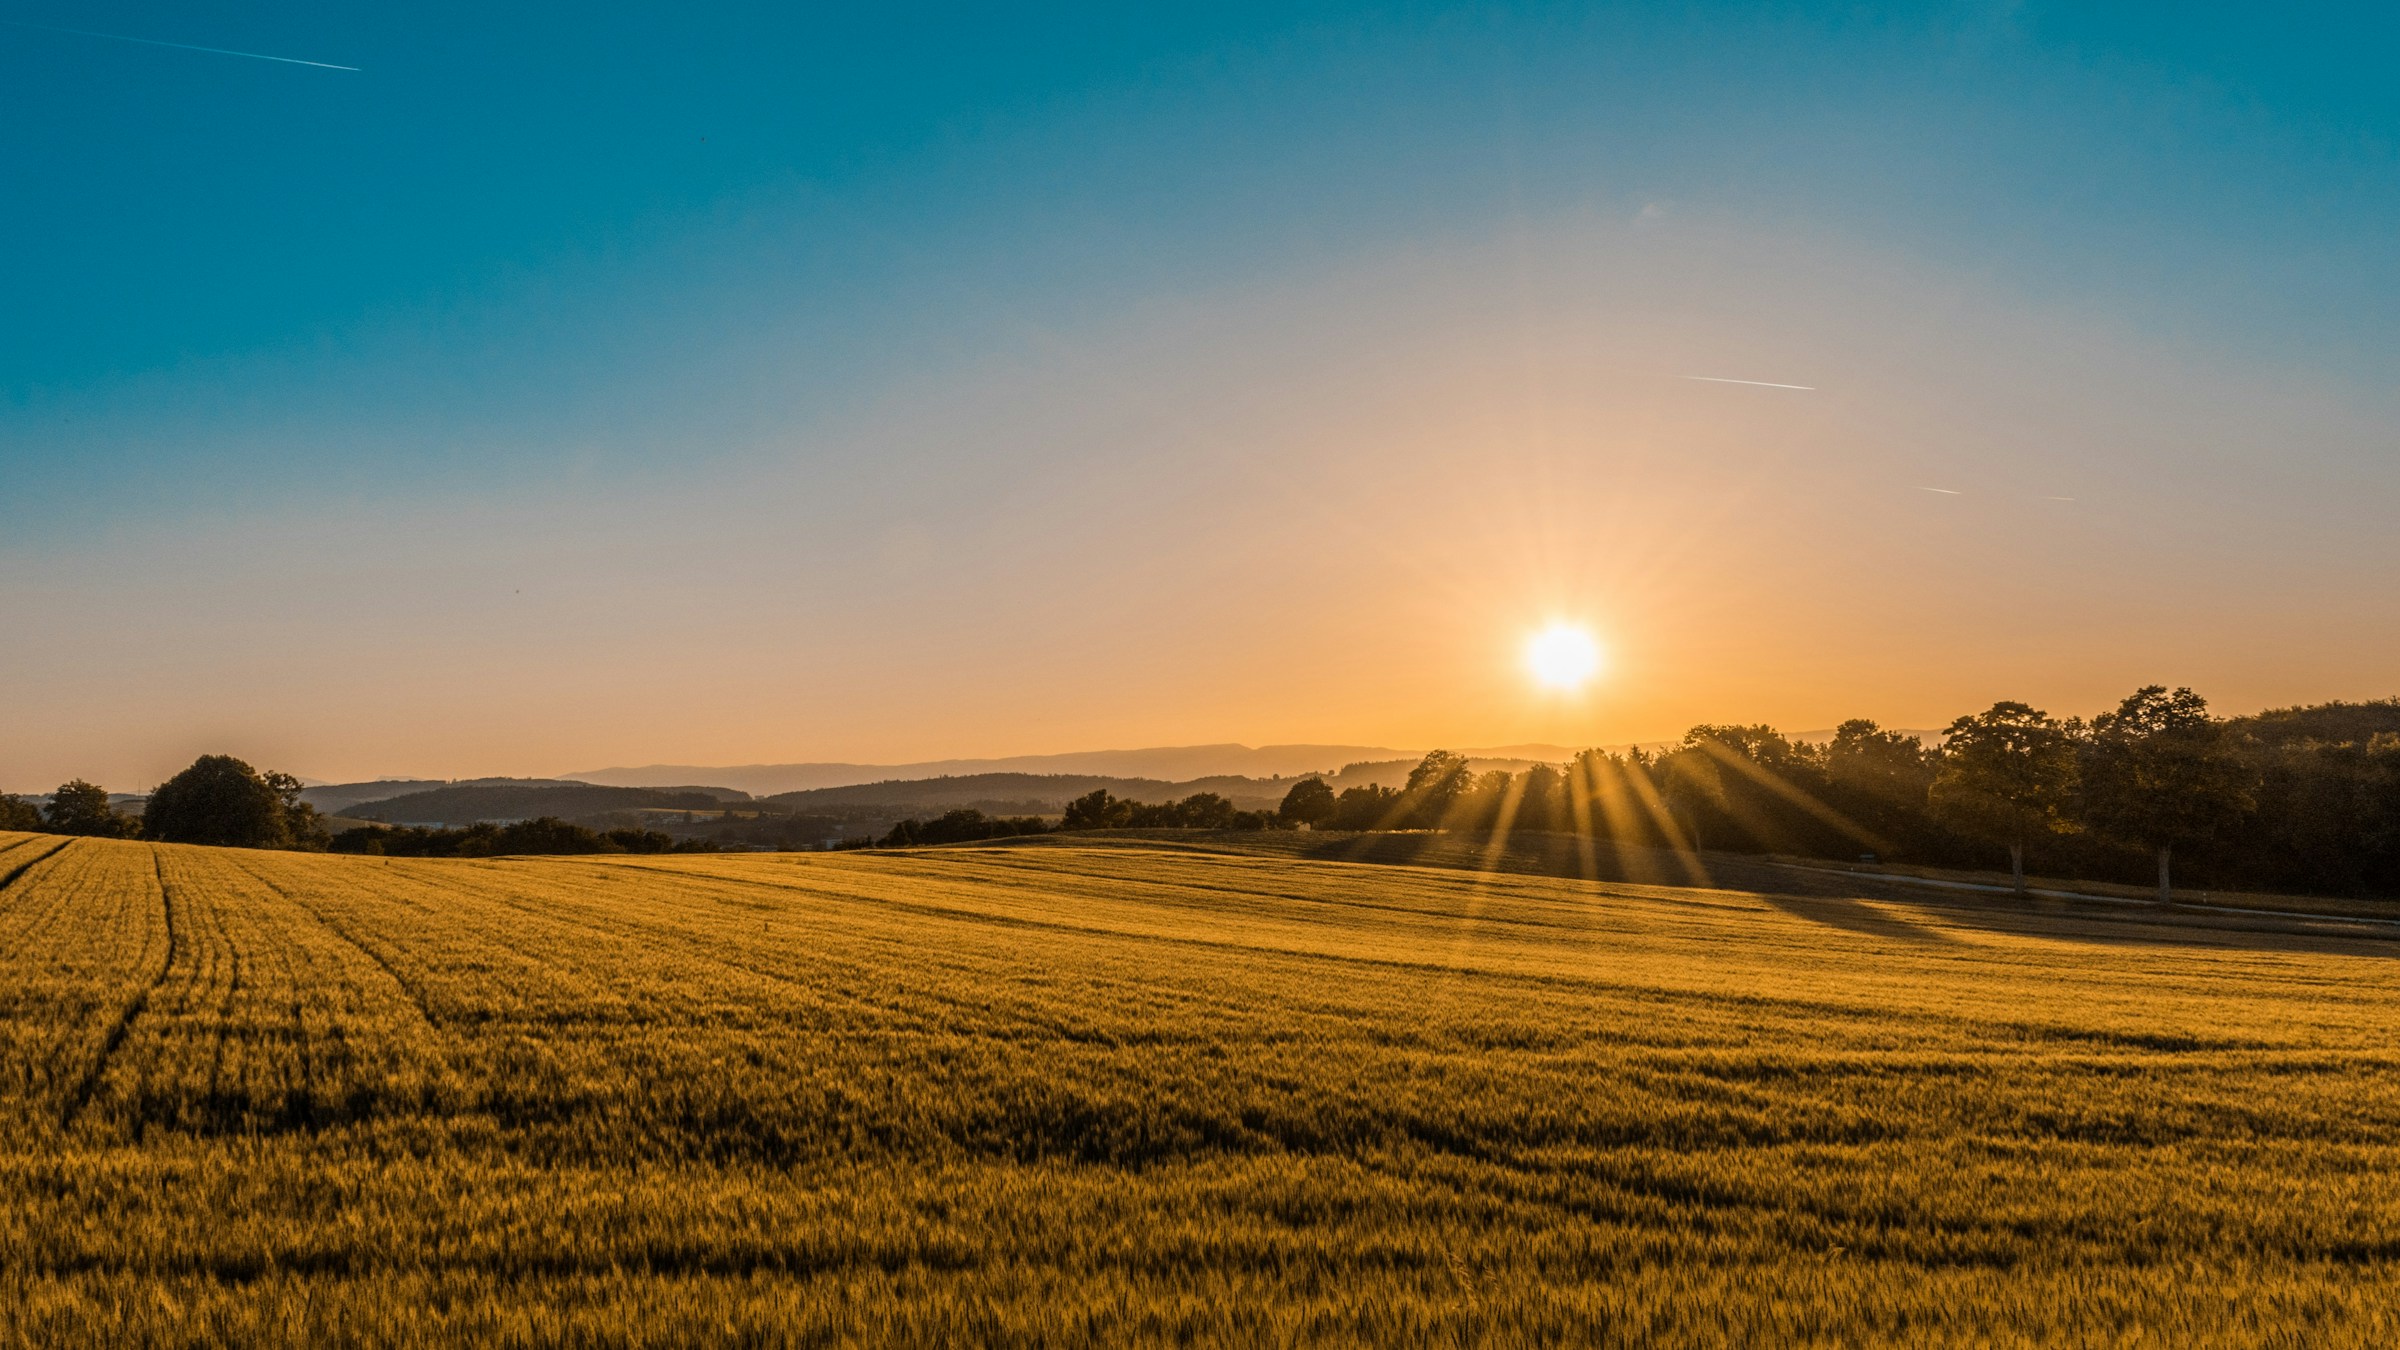 sunrise over a field, spring or early summer